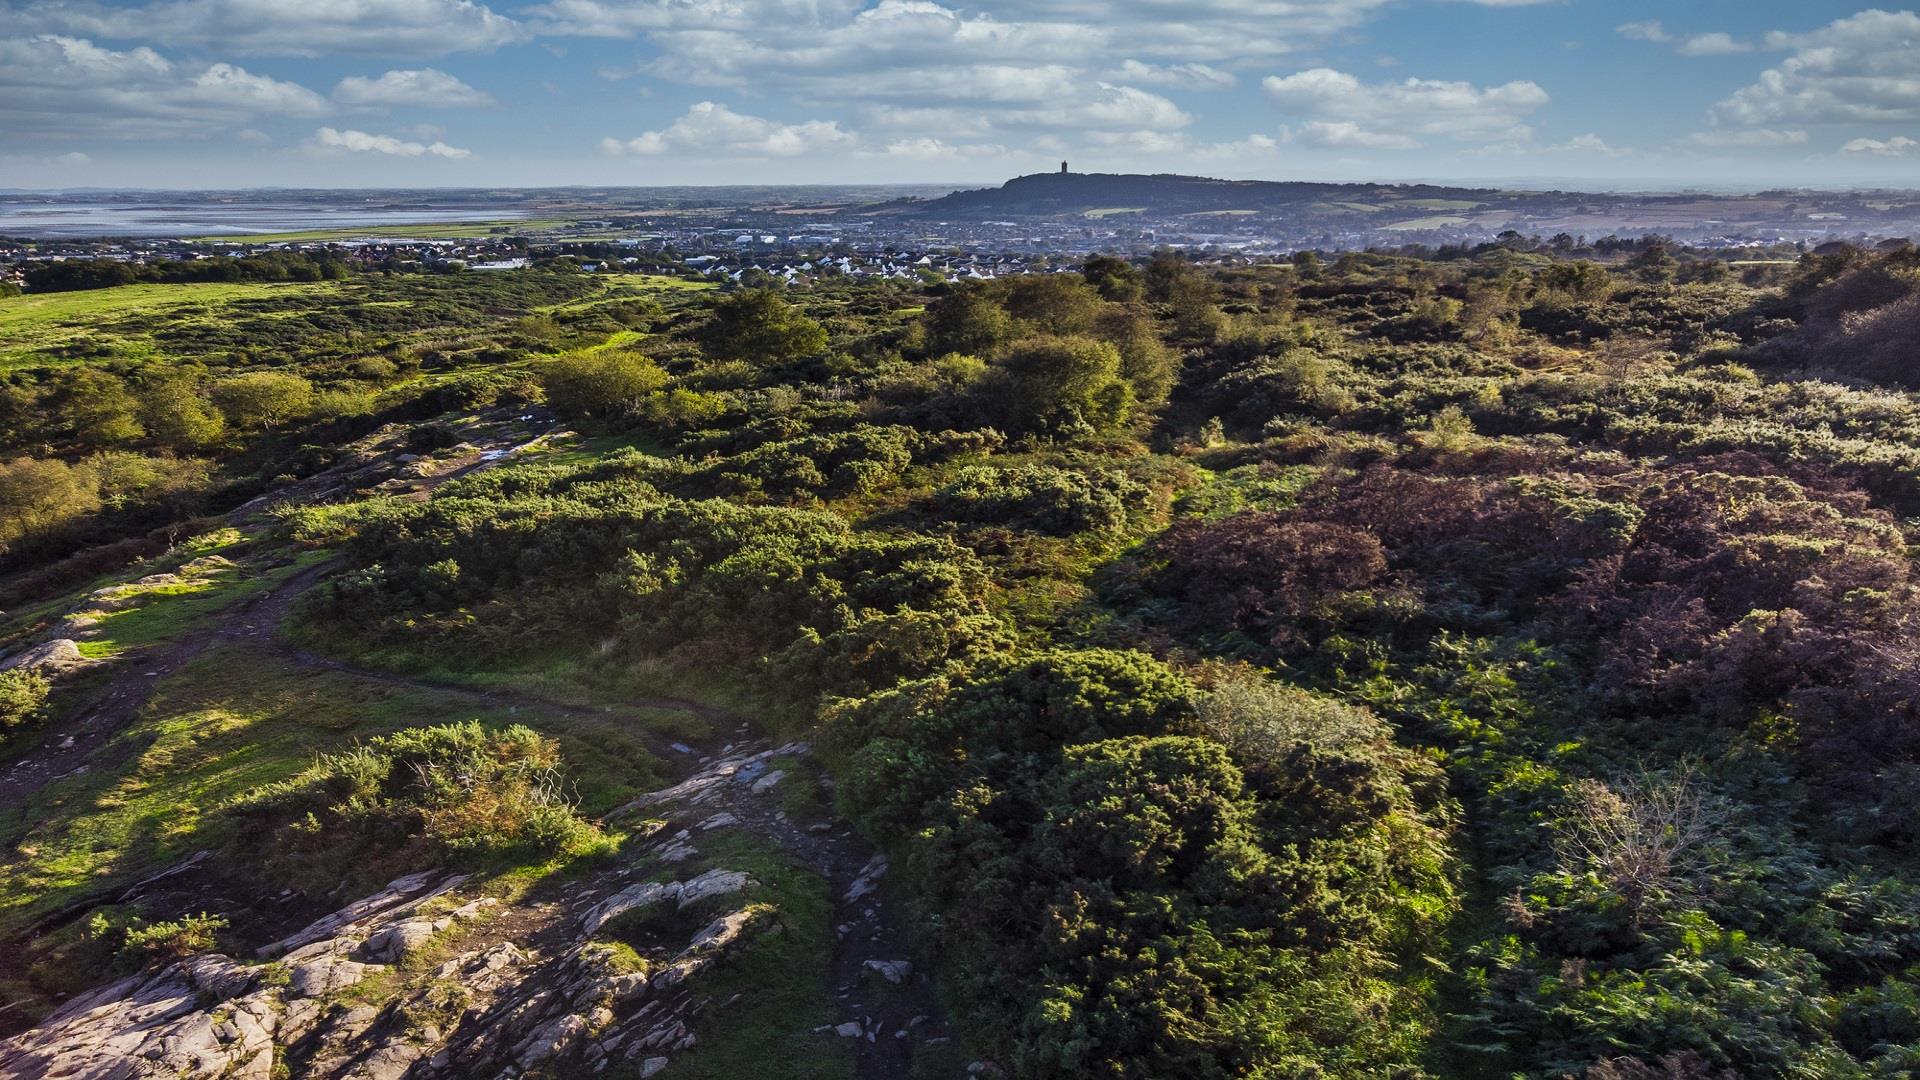 An aerial photo of the Country Park showing the expanse of forest, with Scrabo Tower in the background